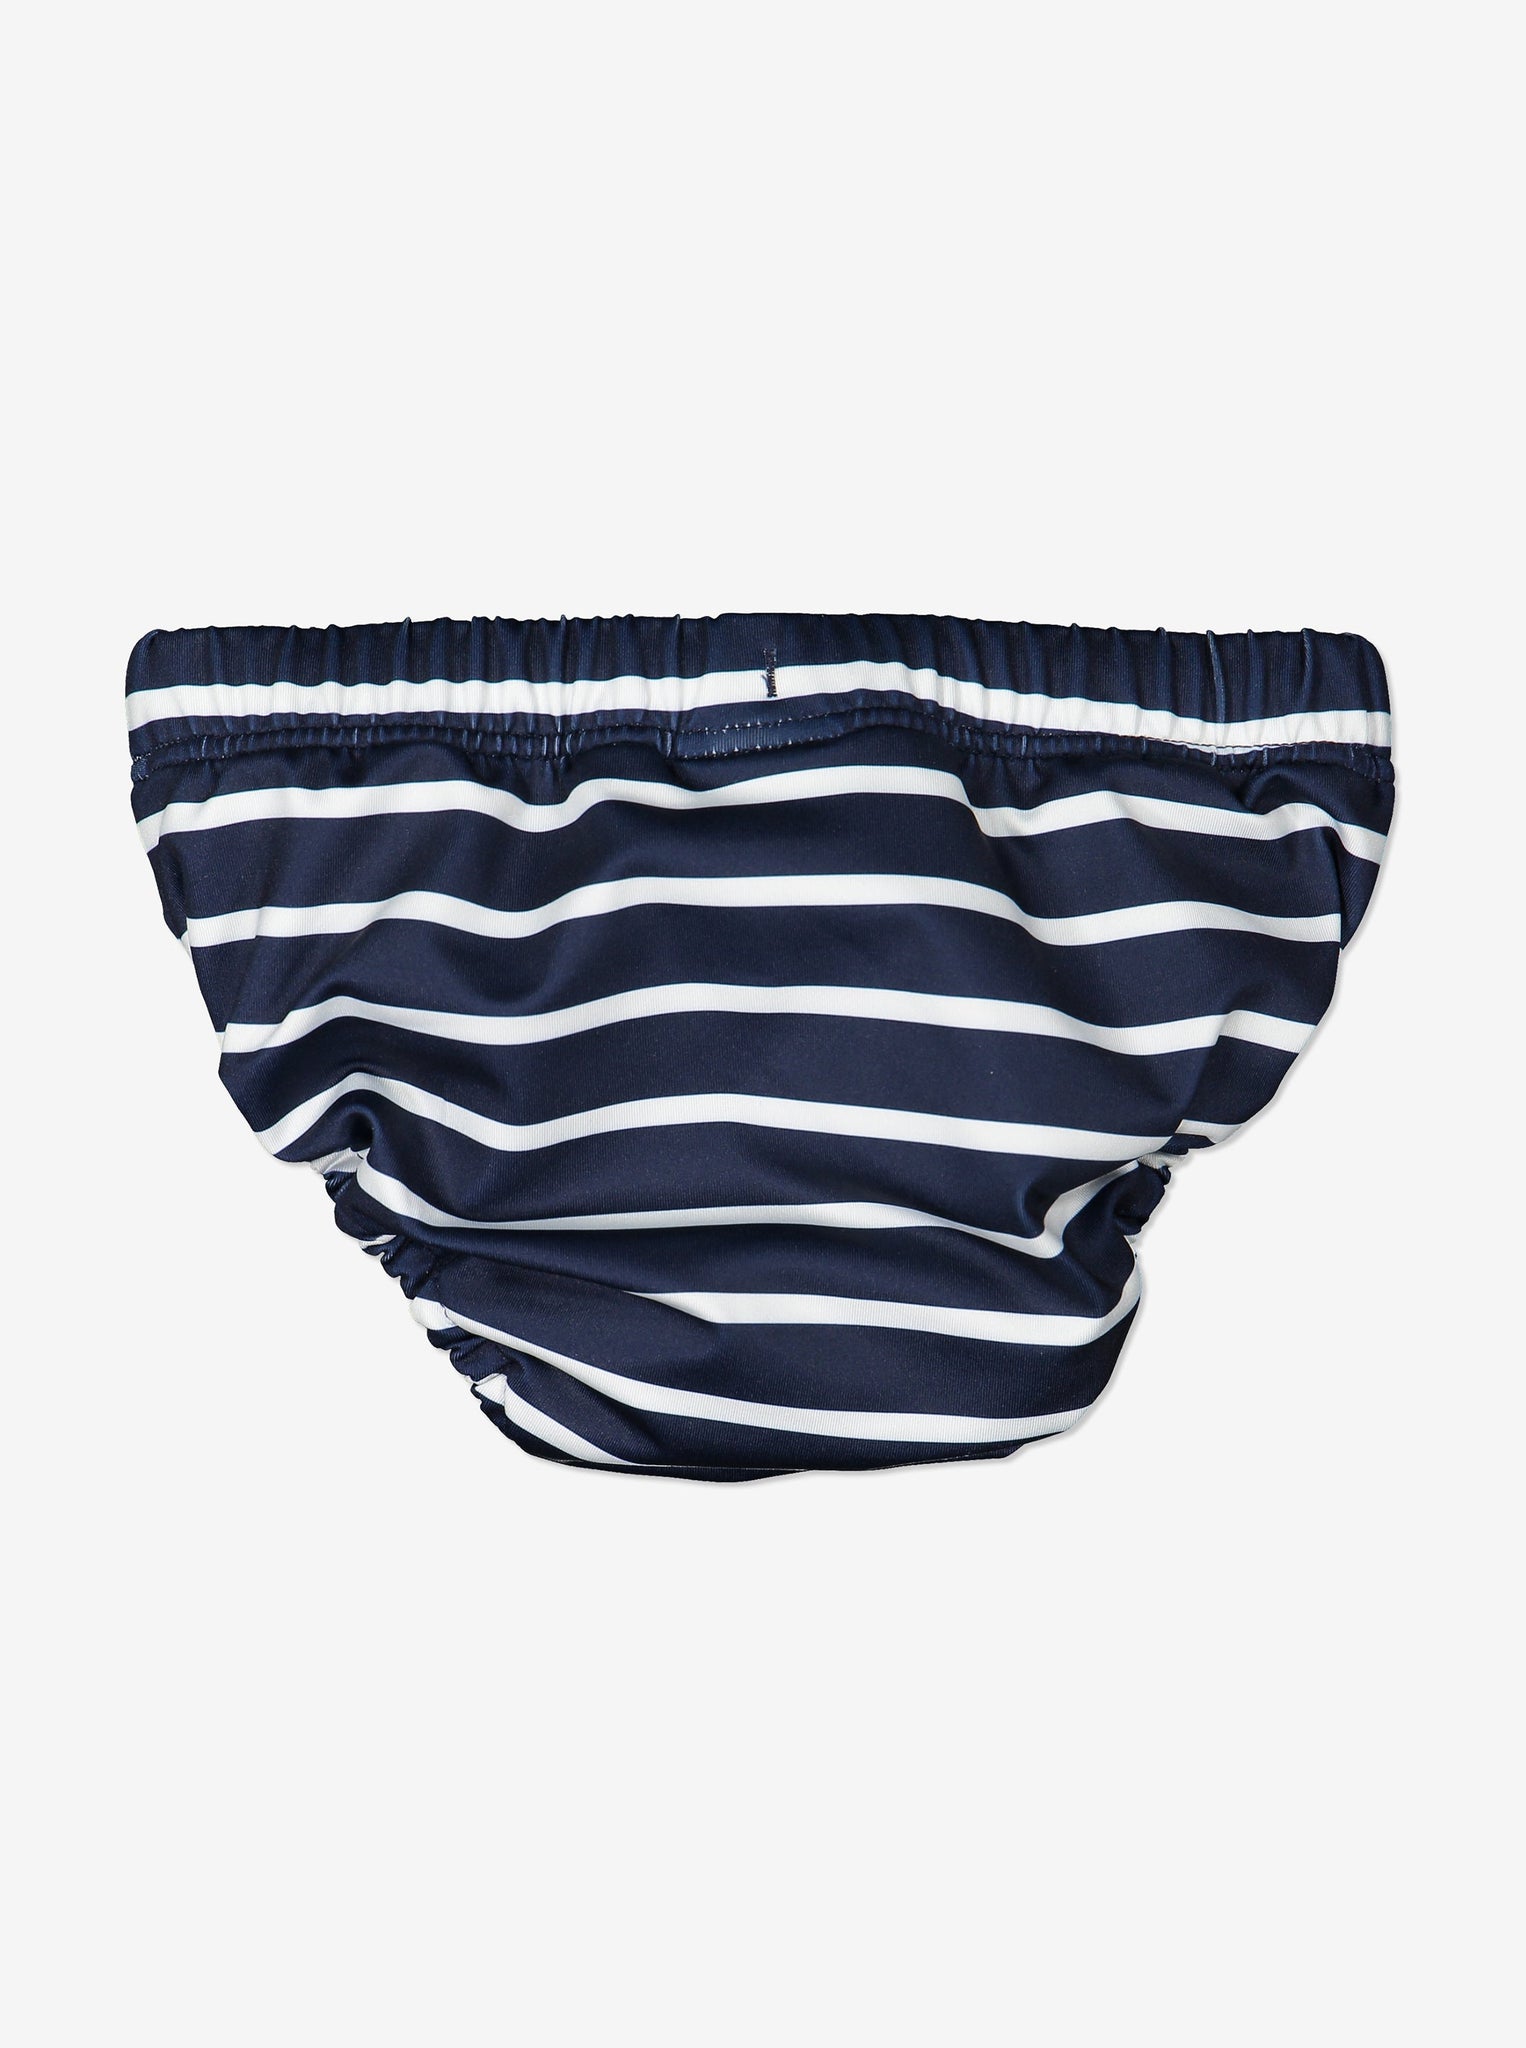 Navy Baby Swim Nappy from the Polarn O. Pyret kidswear collection. Swimwear made from sustainably source materials